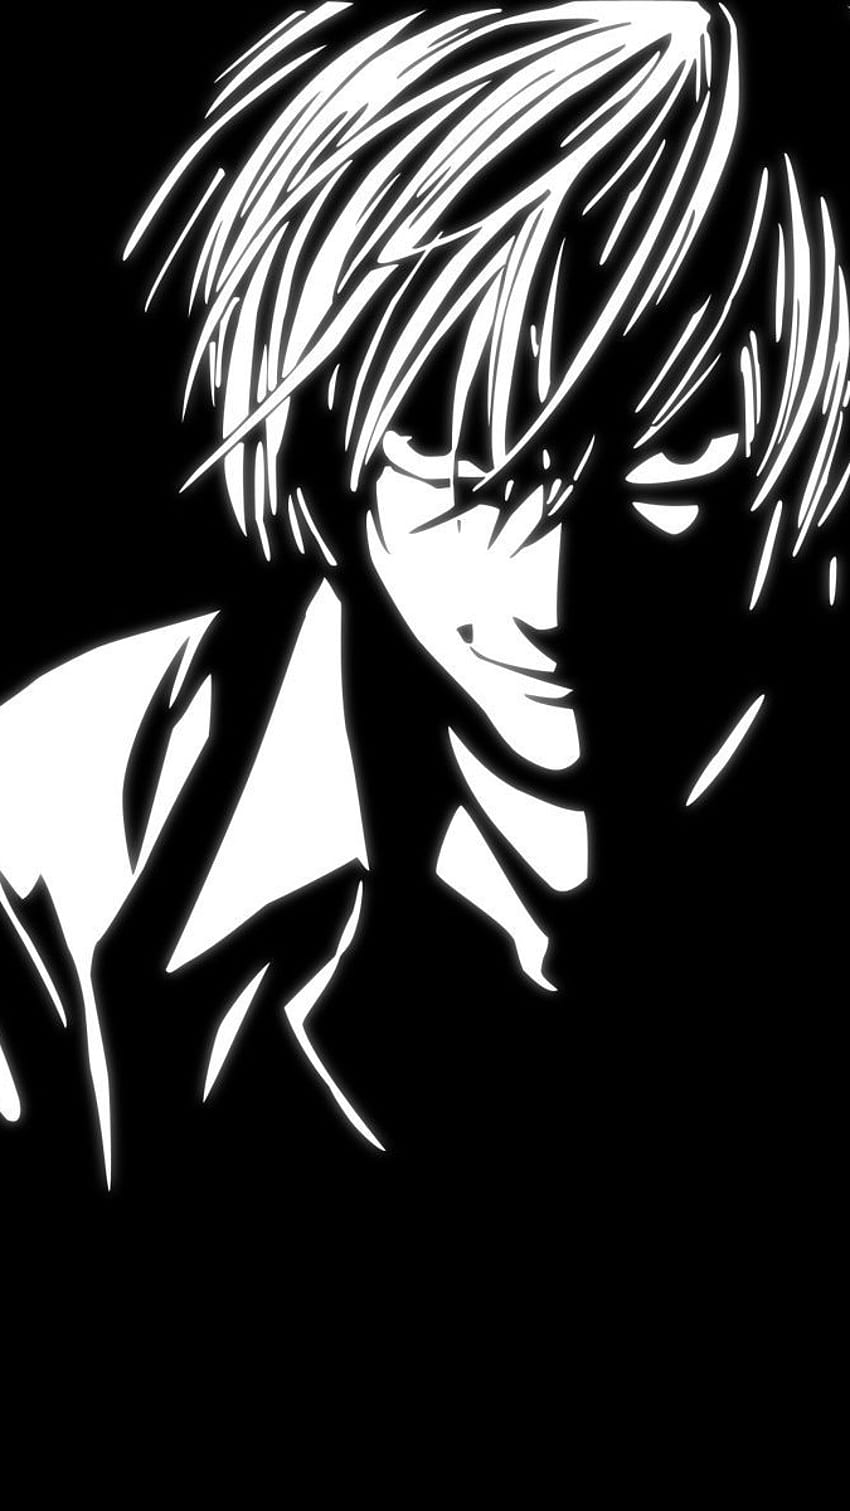 Mobile wallpaper: Anime, Death Note, Light Yagami, Kira (Death Note),  1384910 download the picture for free.